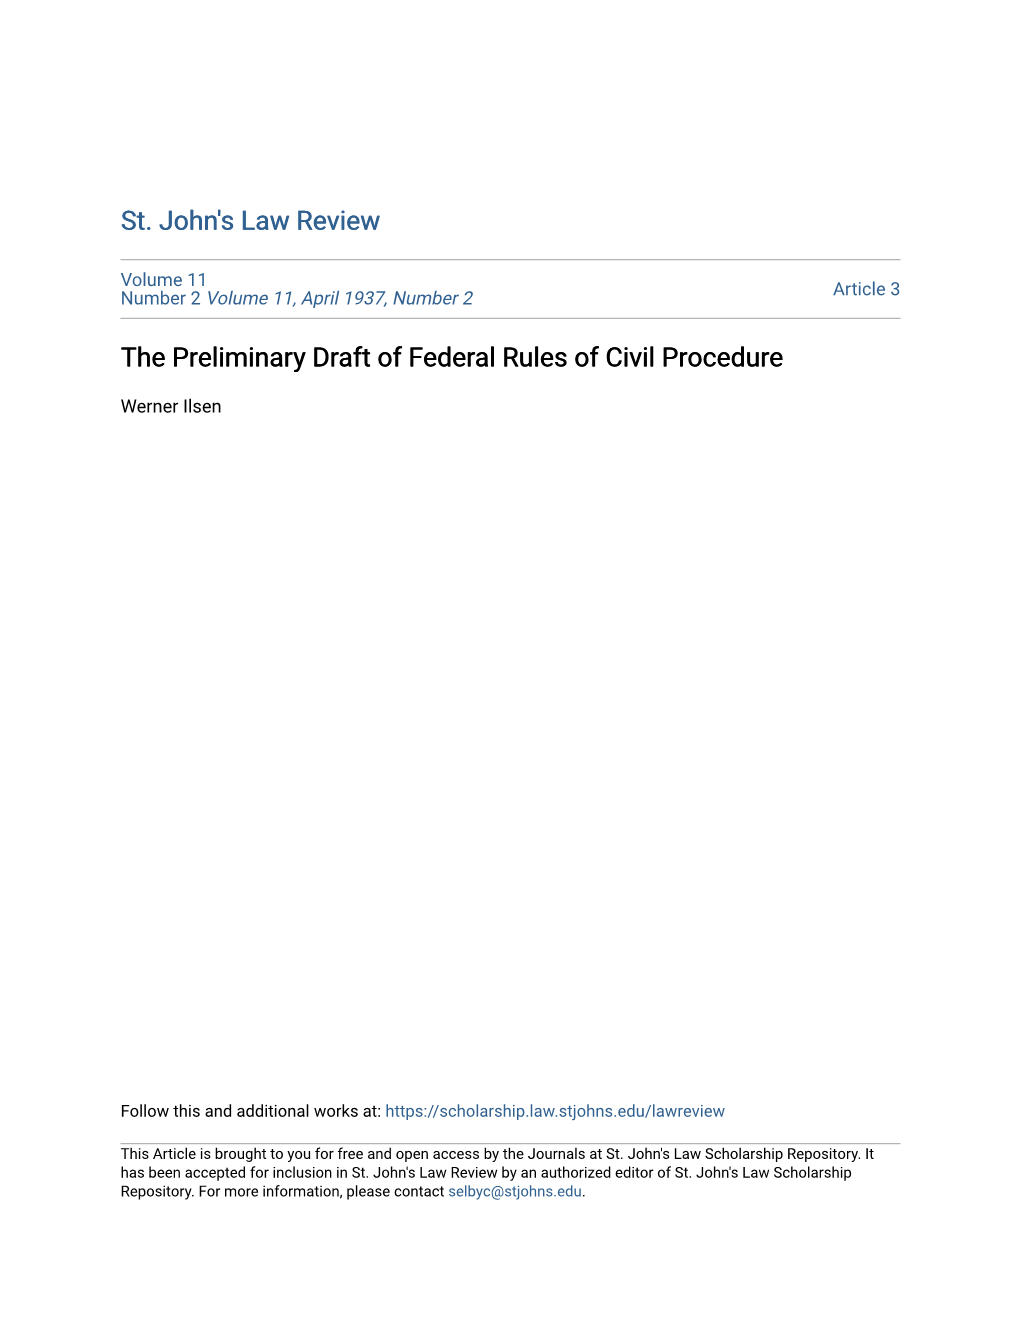 The Preliminary Draft of Federal Rules of Civil Procedure